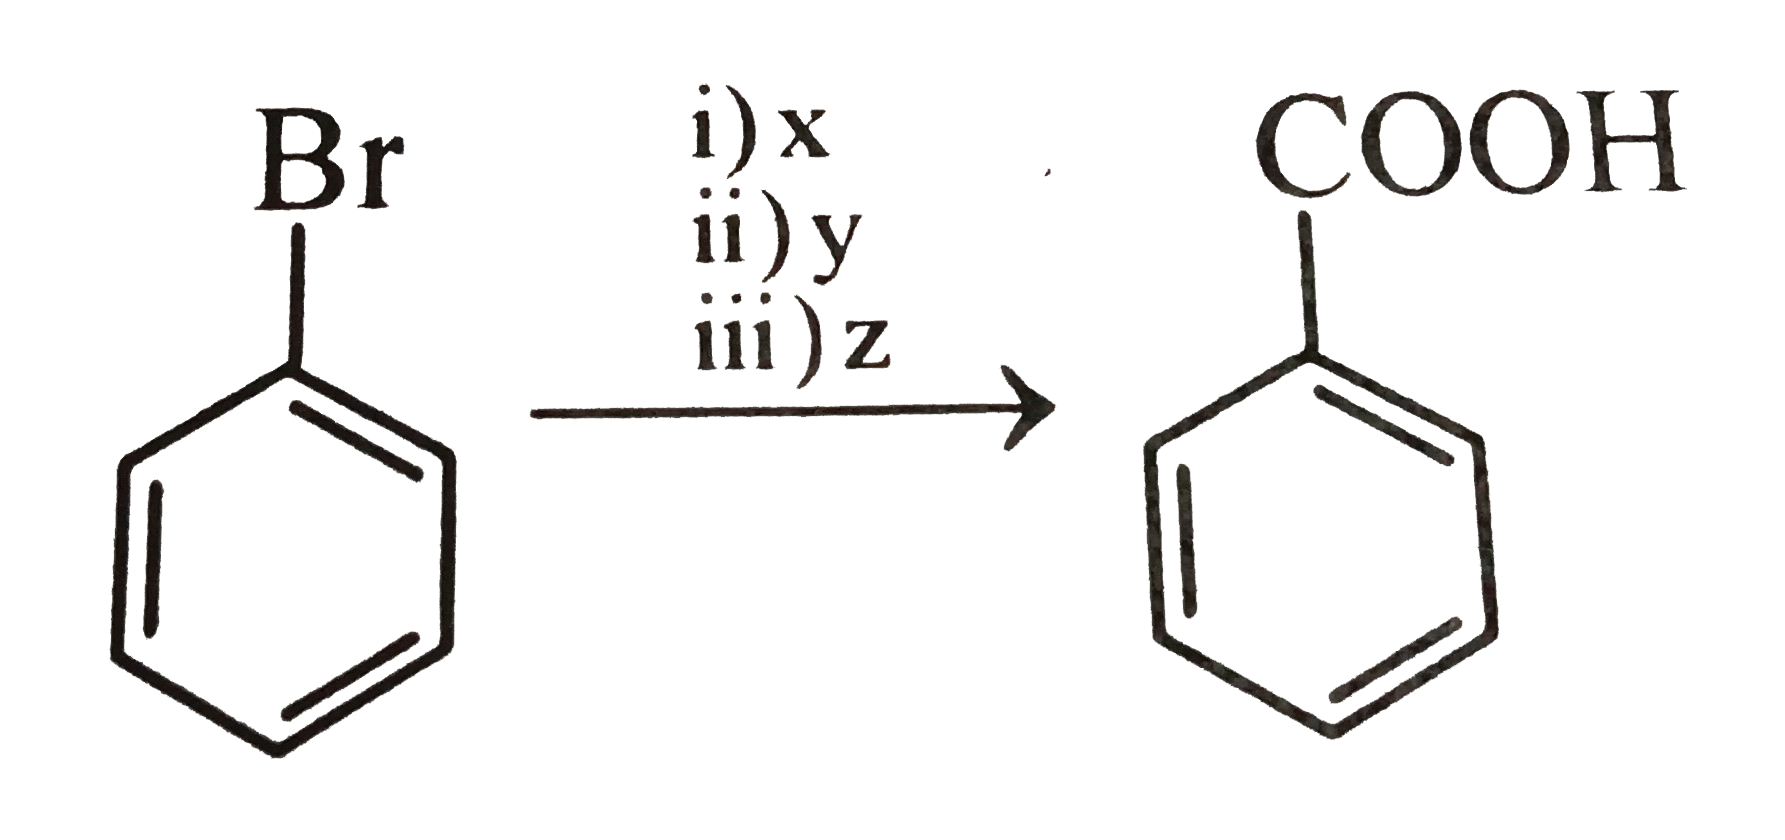 In the reaction      x,y and z are